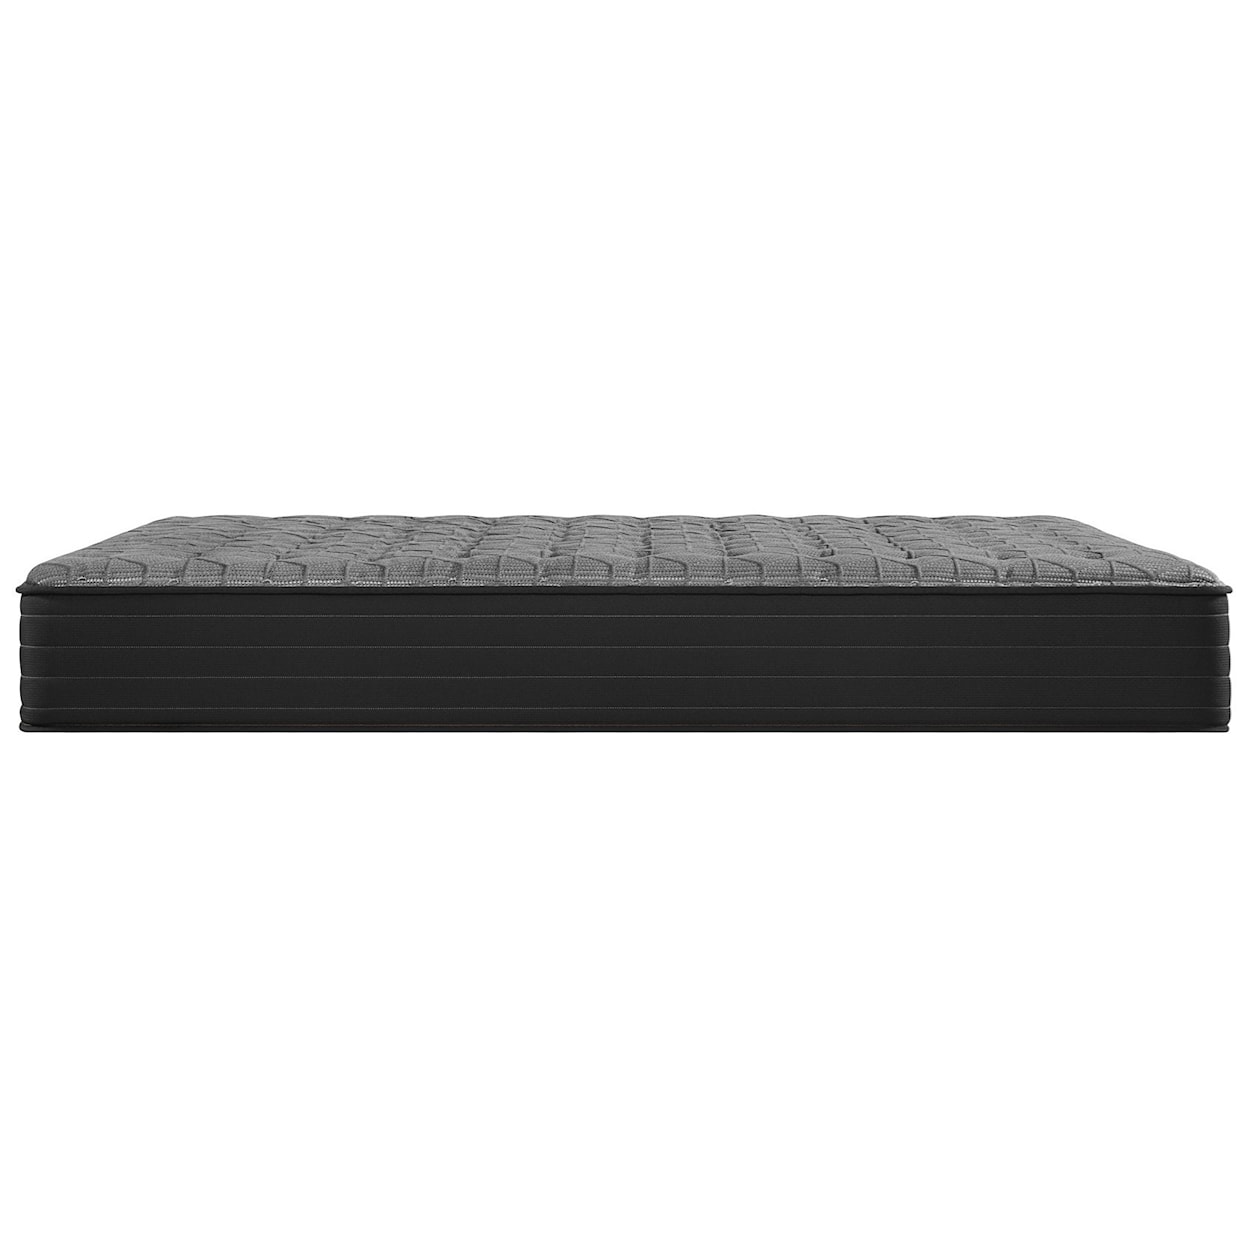 Sealy Sealy Response Performance H4 CF Queen Cushion Firm Mattress